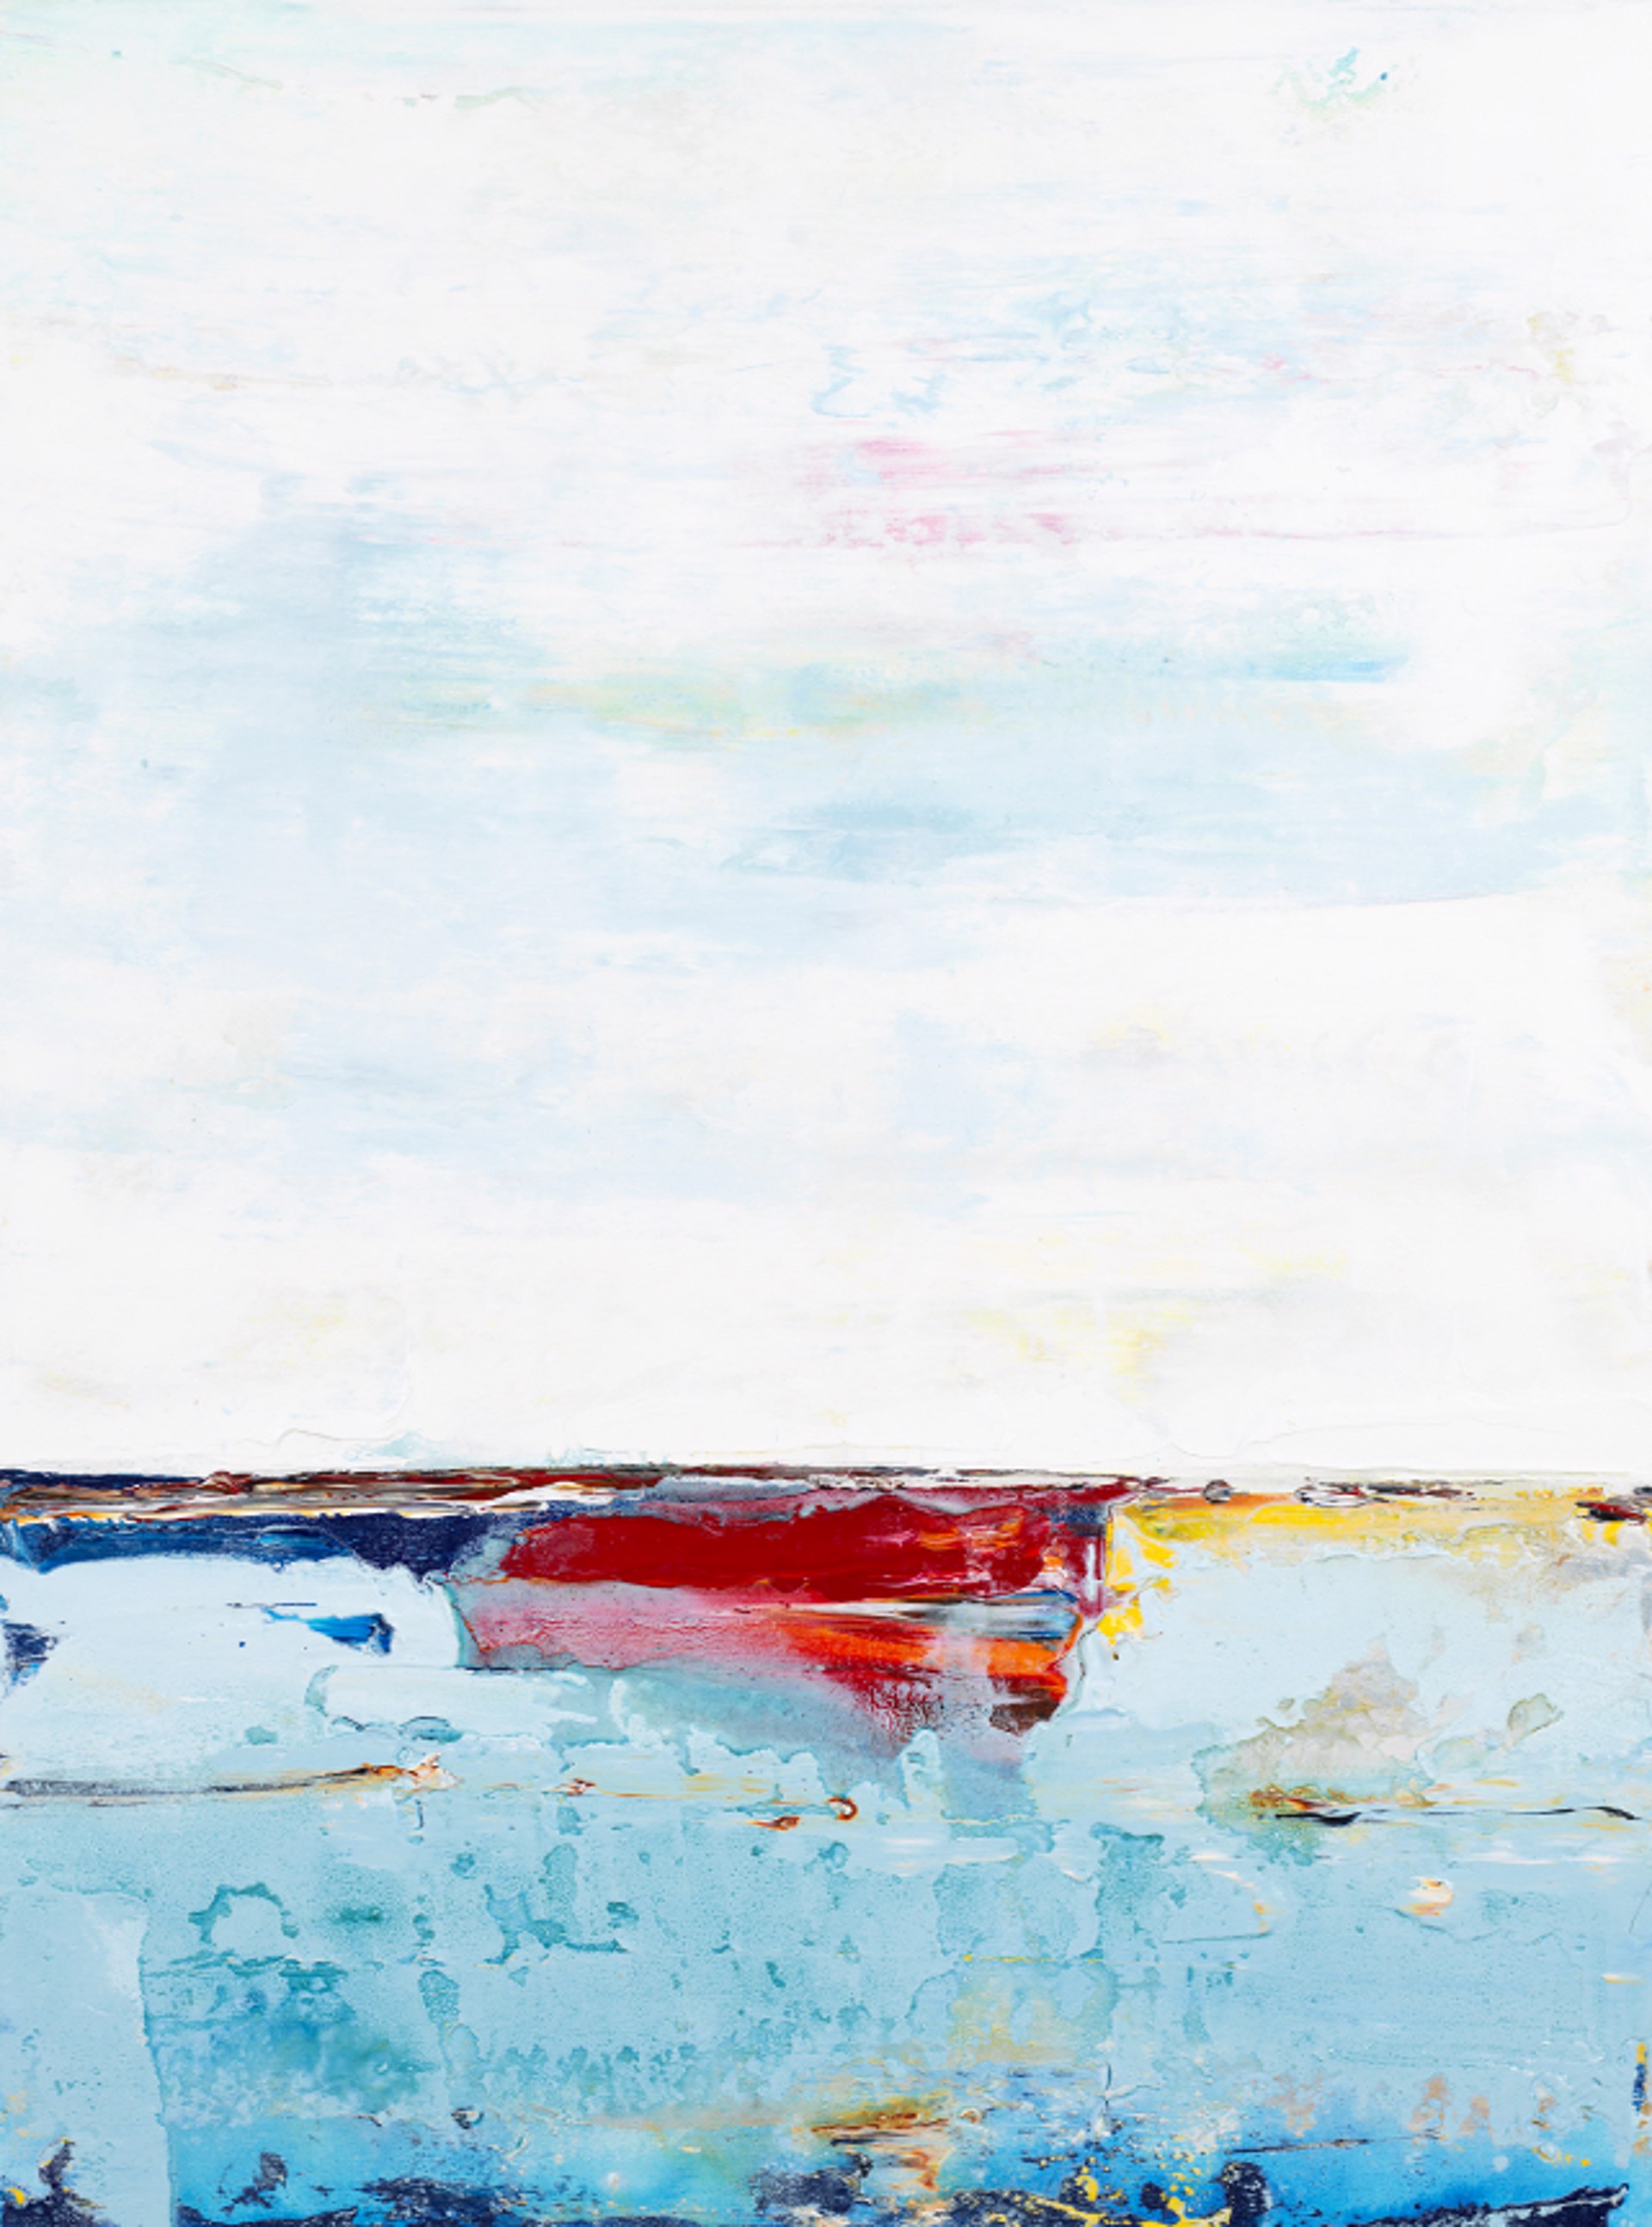 Marino #56 is a beautiful 40"H x 30"W abstract seascape painting by South Florida artist and painter John Schuyler, featuring a dividing line where sky meets sea. 